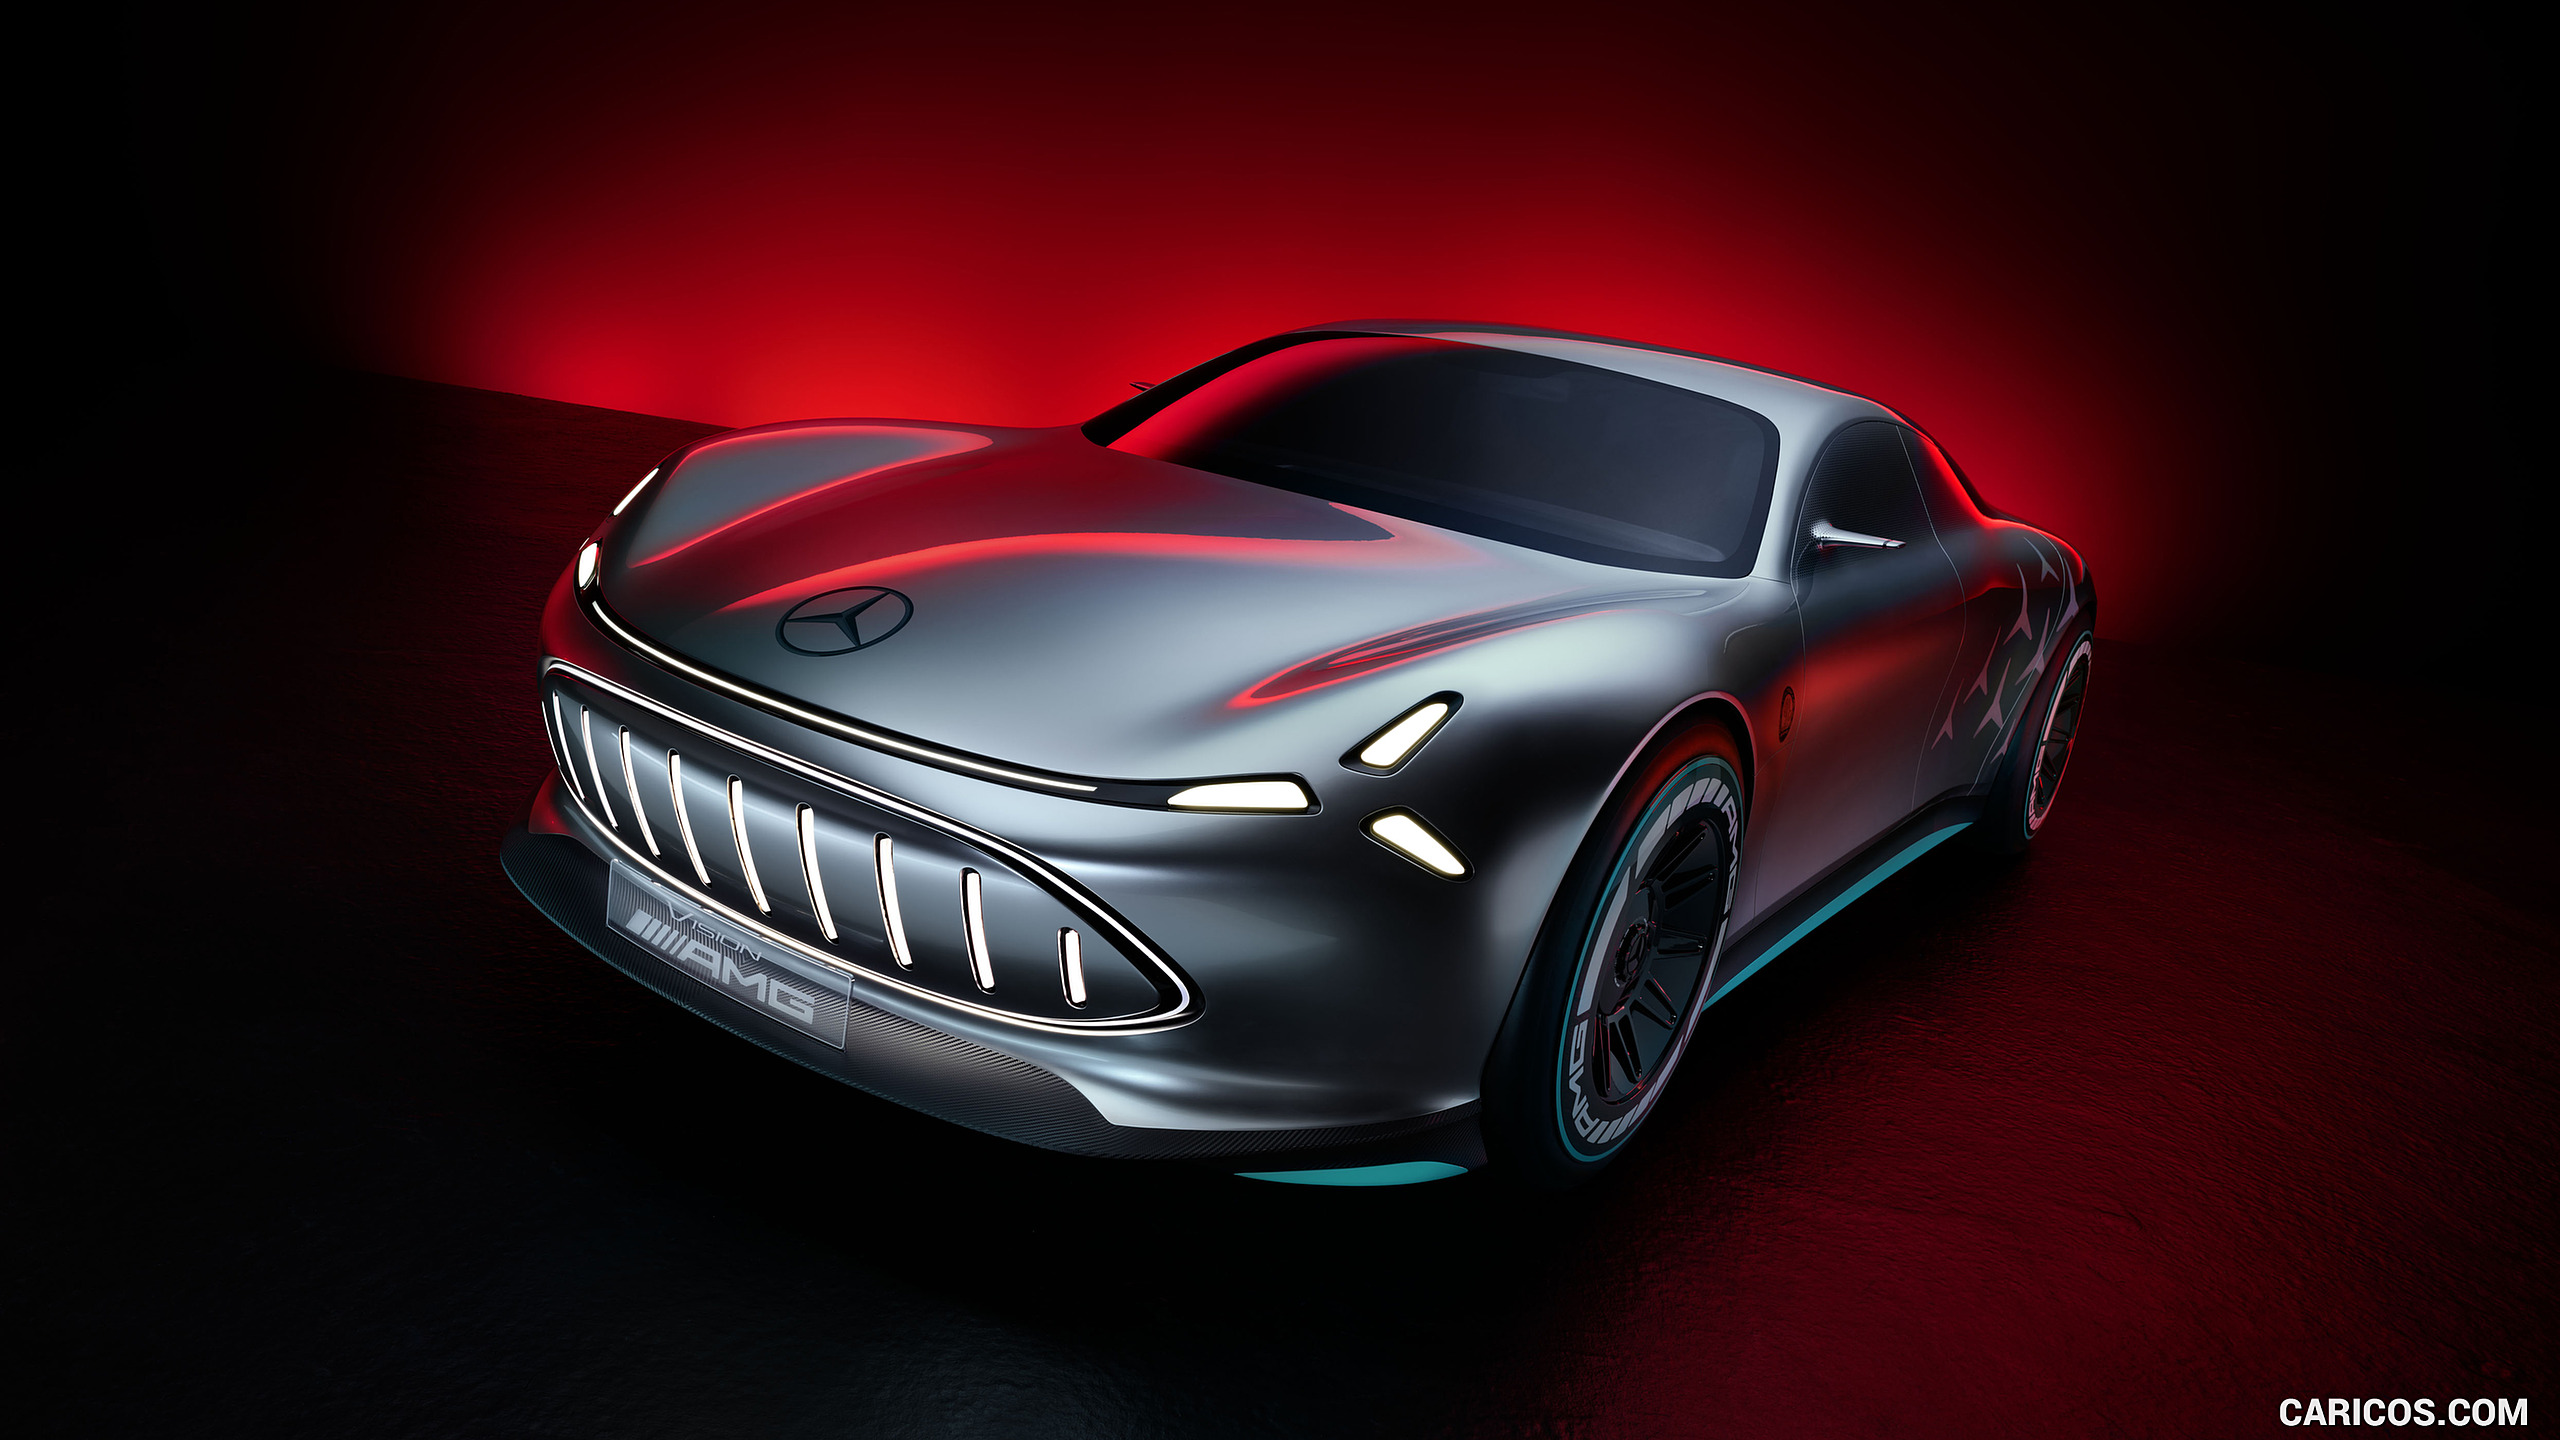 2022 Mercedes-Benz Vision AMG Concept - Front, #17 of 43